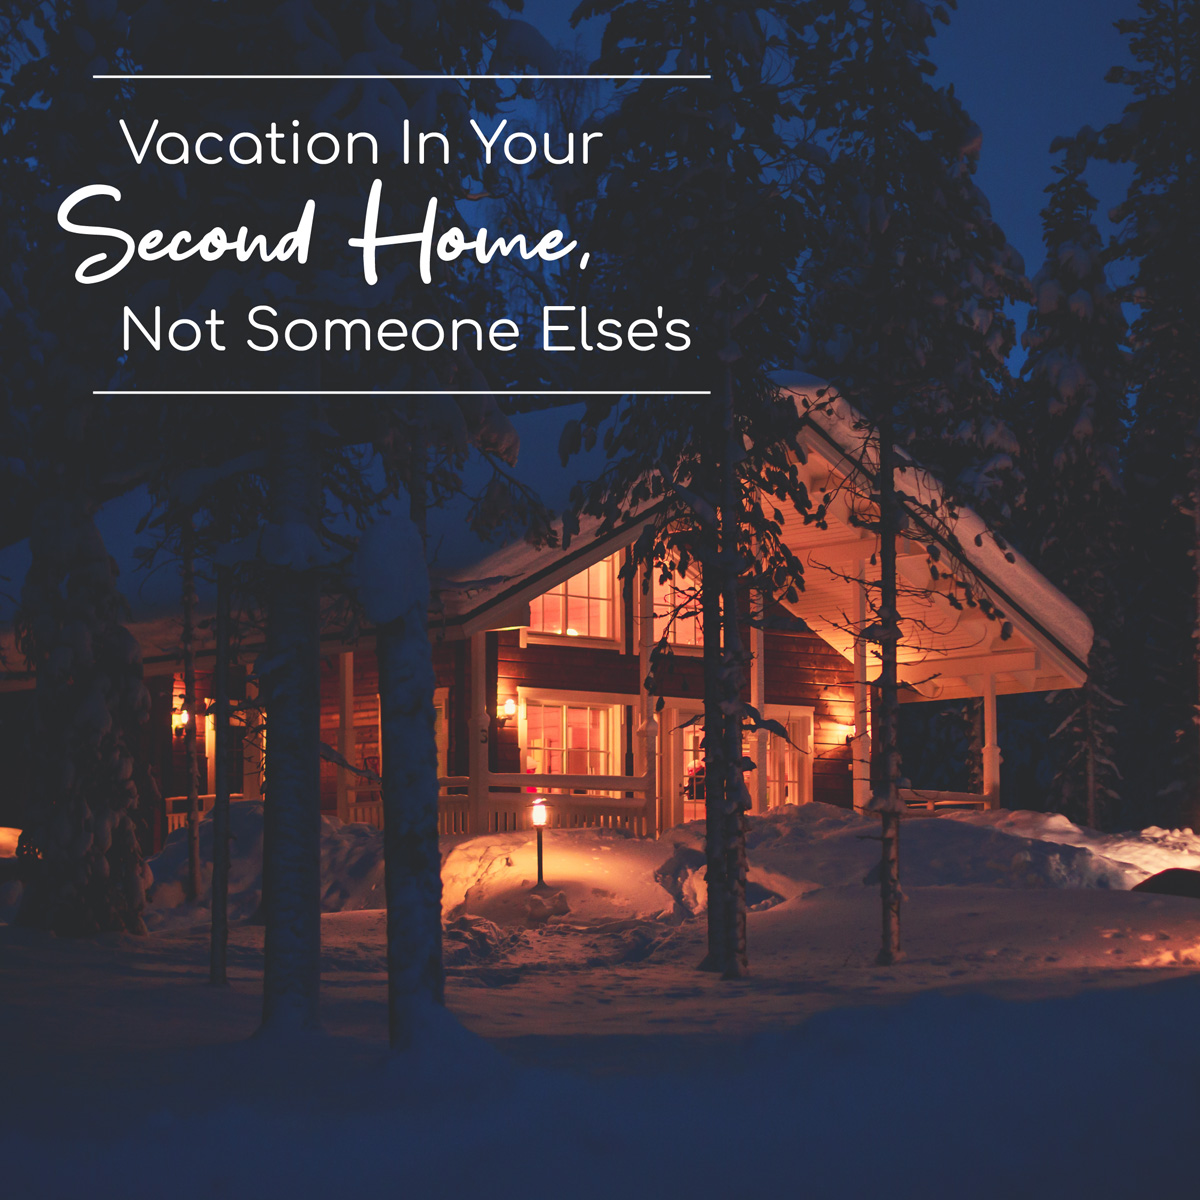 Vacation rentals all booked up? All the more reason to purchase a second home. No more reservations, and no more disappointment. Message me today to see if you qualify. #mortgageloan #realestate #vacationrental #secondhome #conventionalloan #preapproval